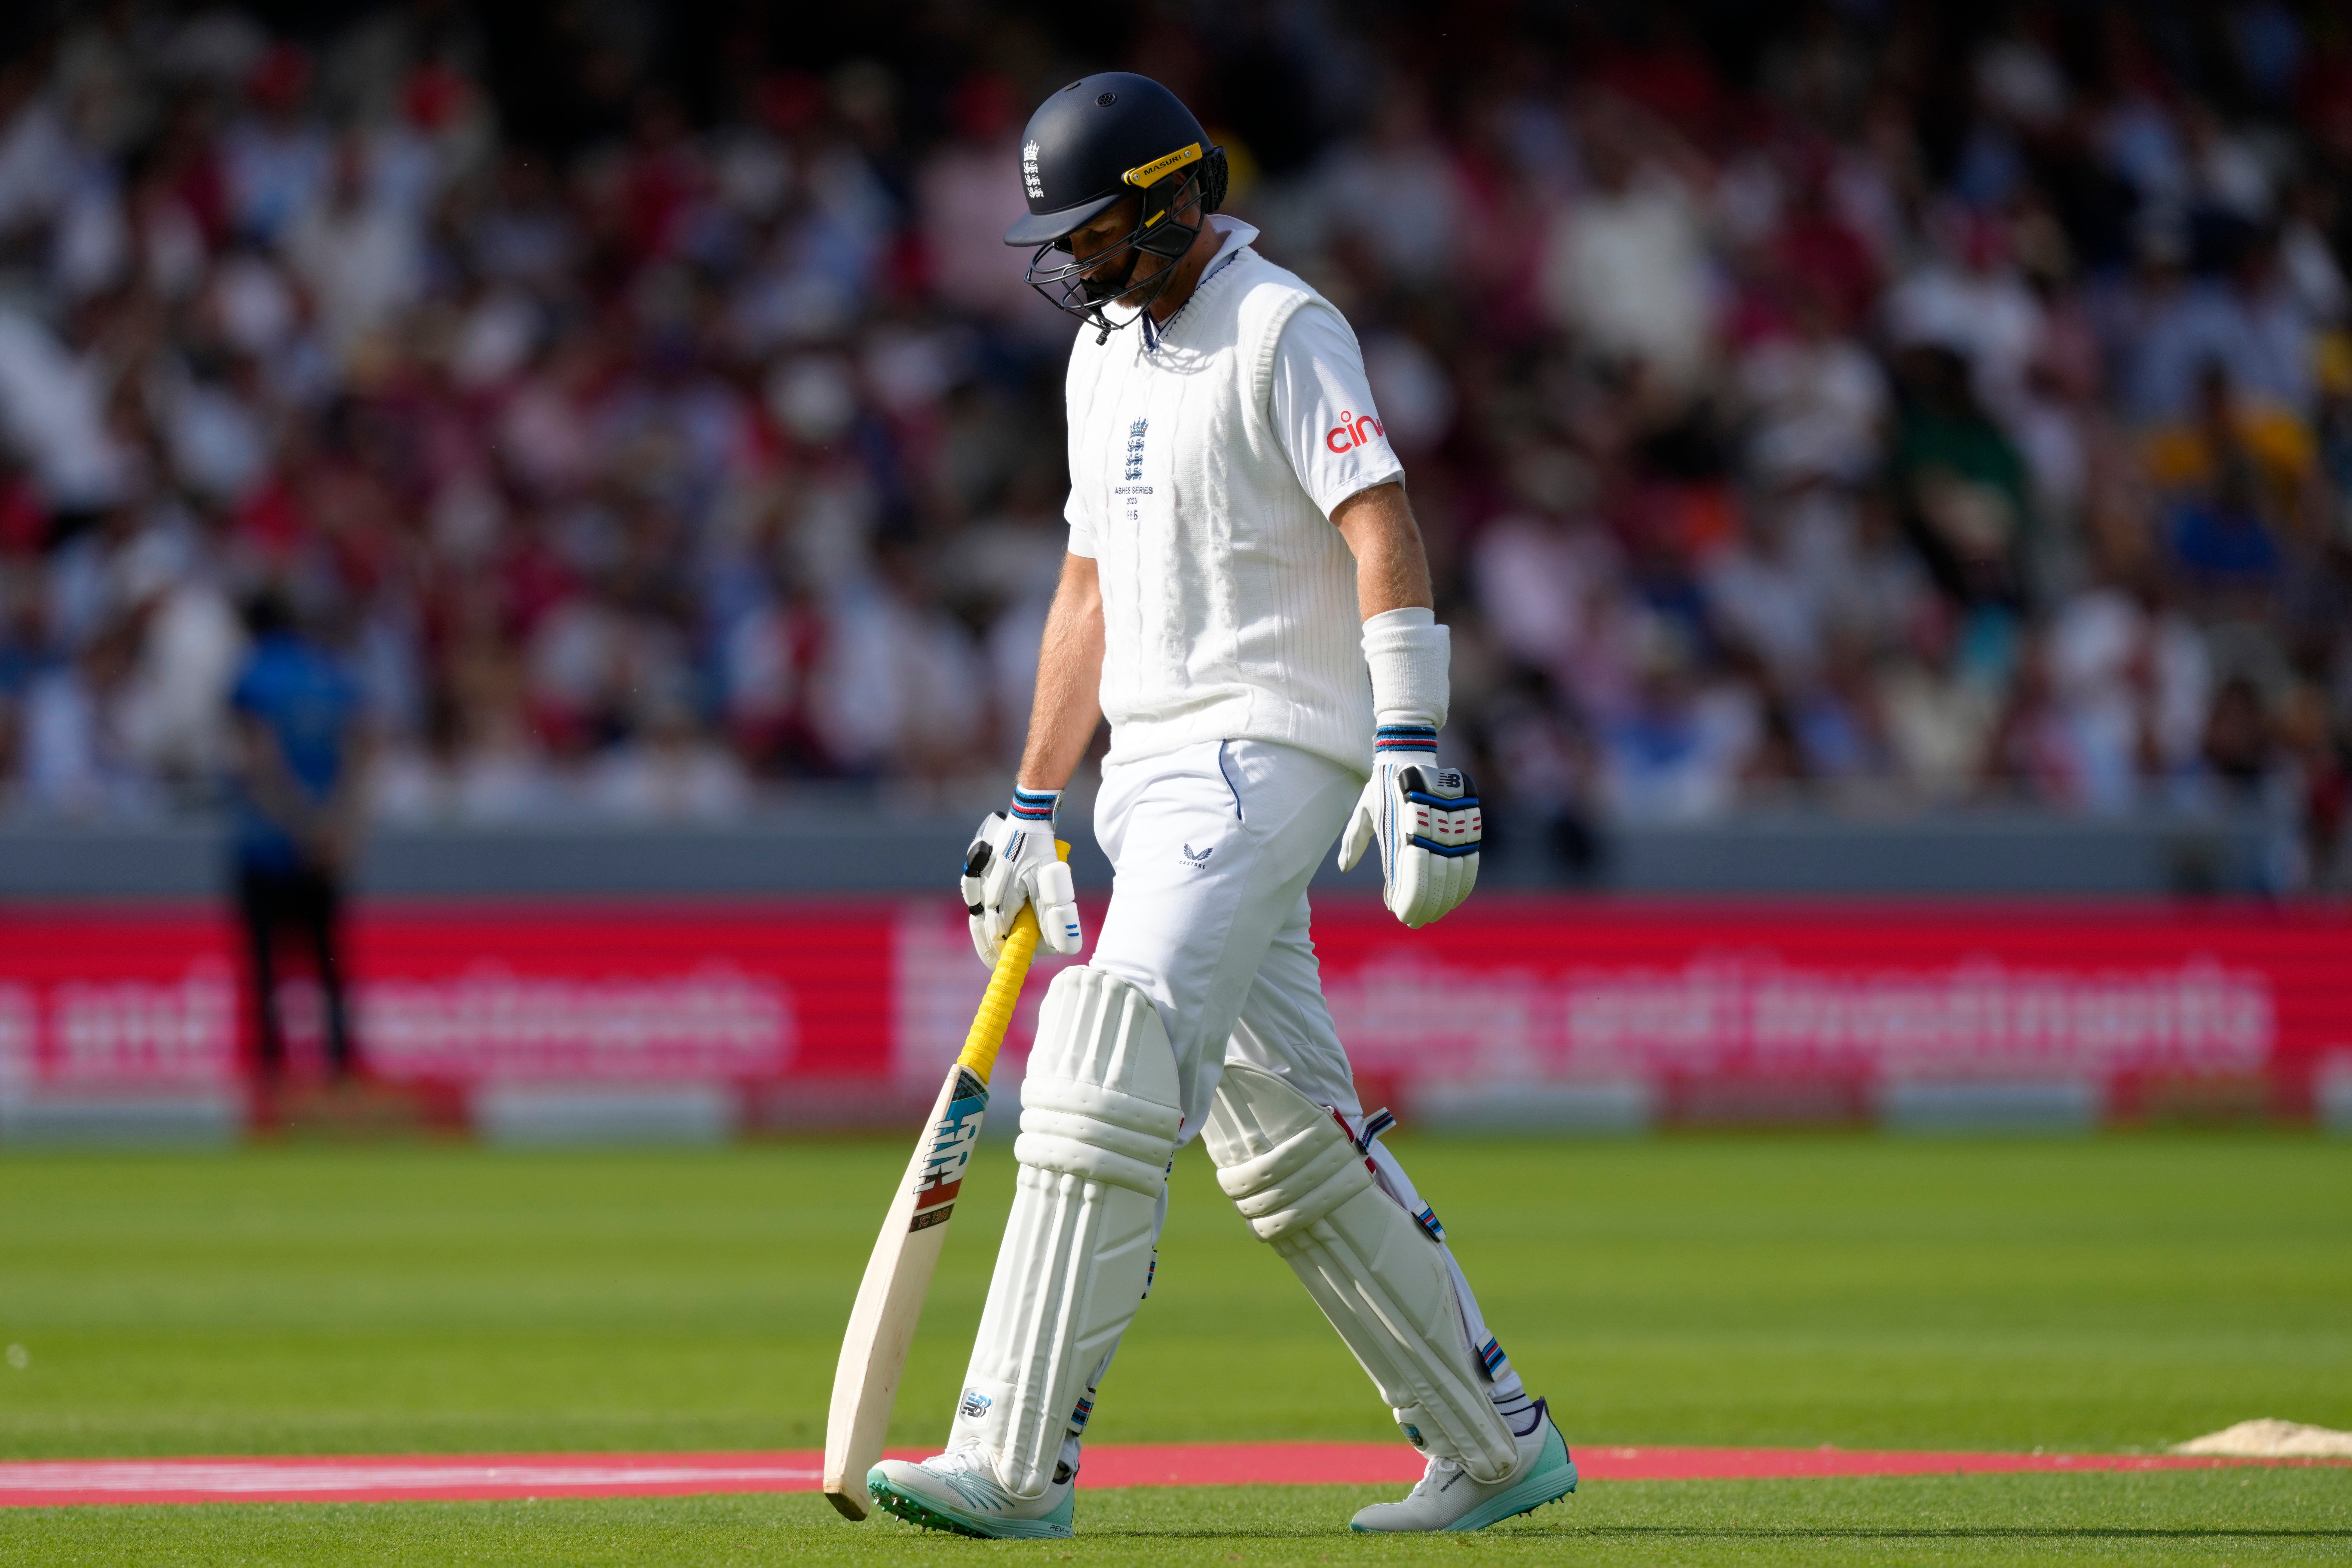 Joe Root was dismissed hooking Mitchell Starc after previously being reprieved from a no-ball